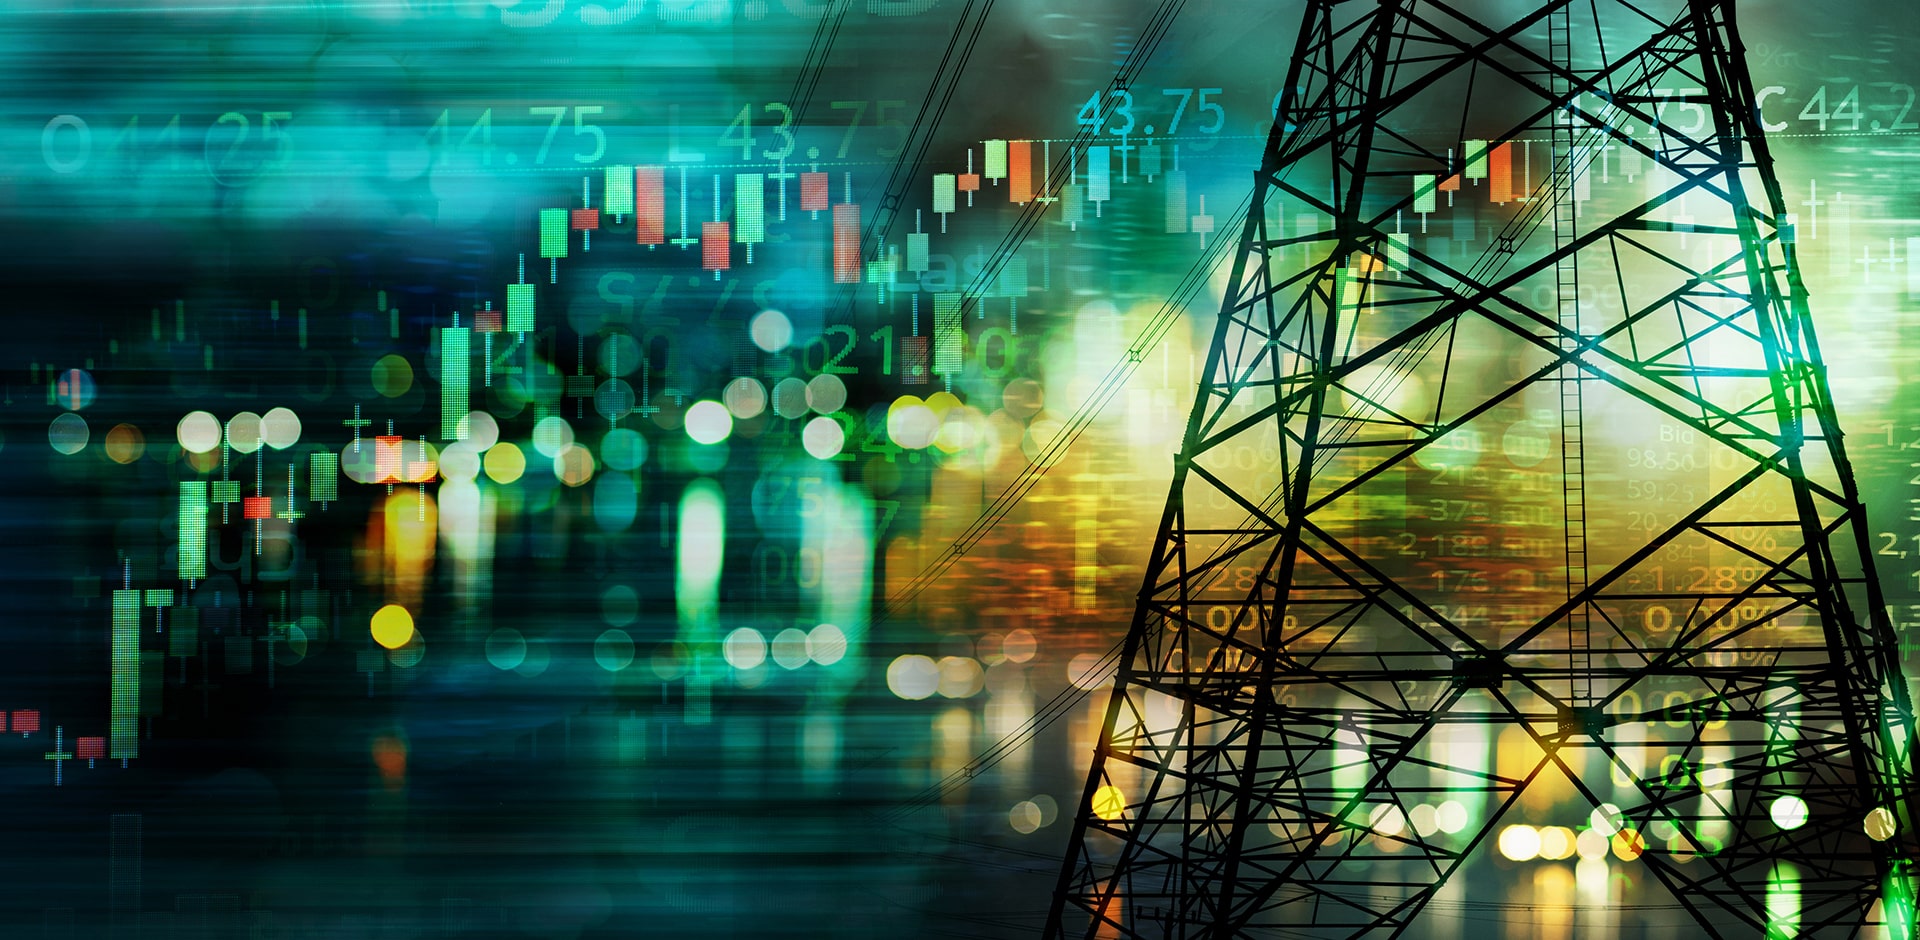 Stock exchange graphics next to a power line against city lights.